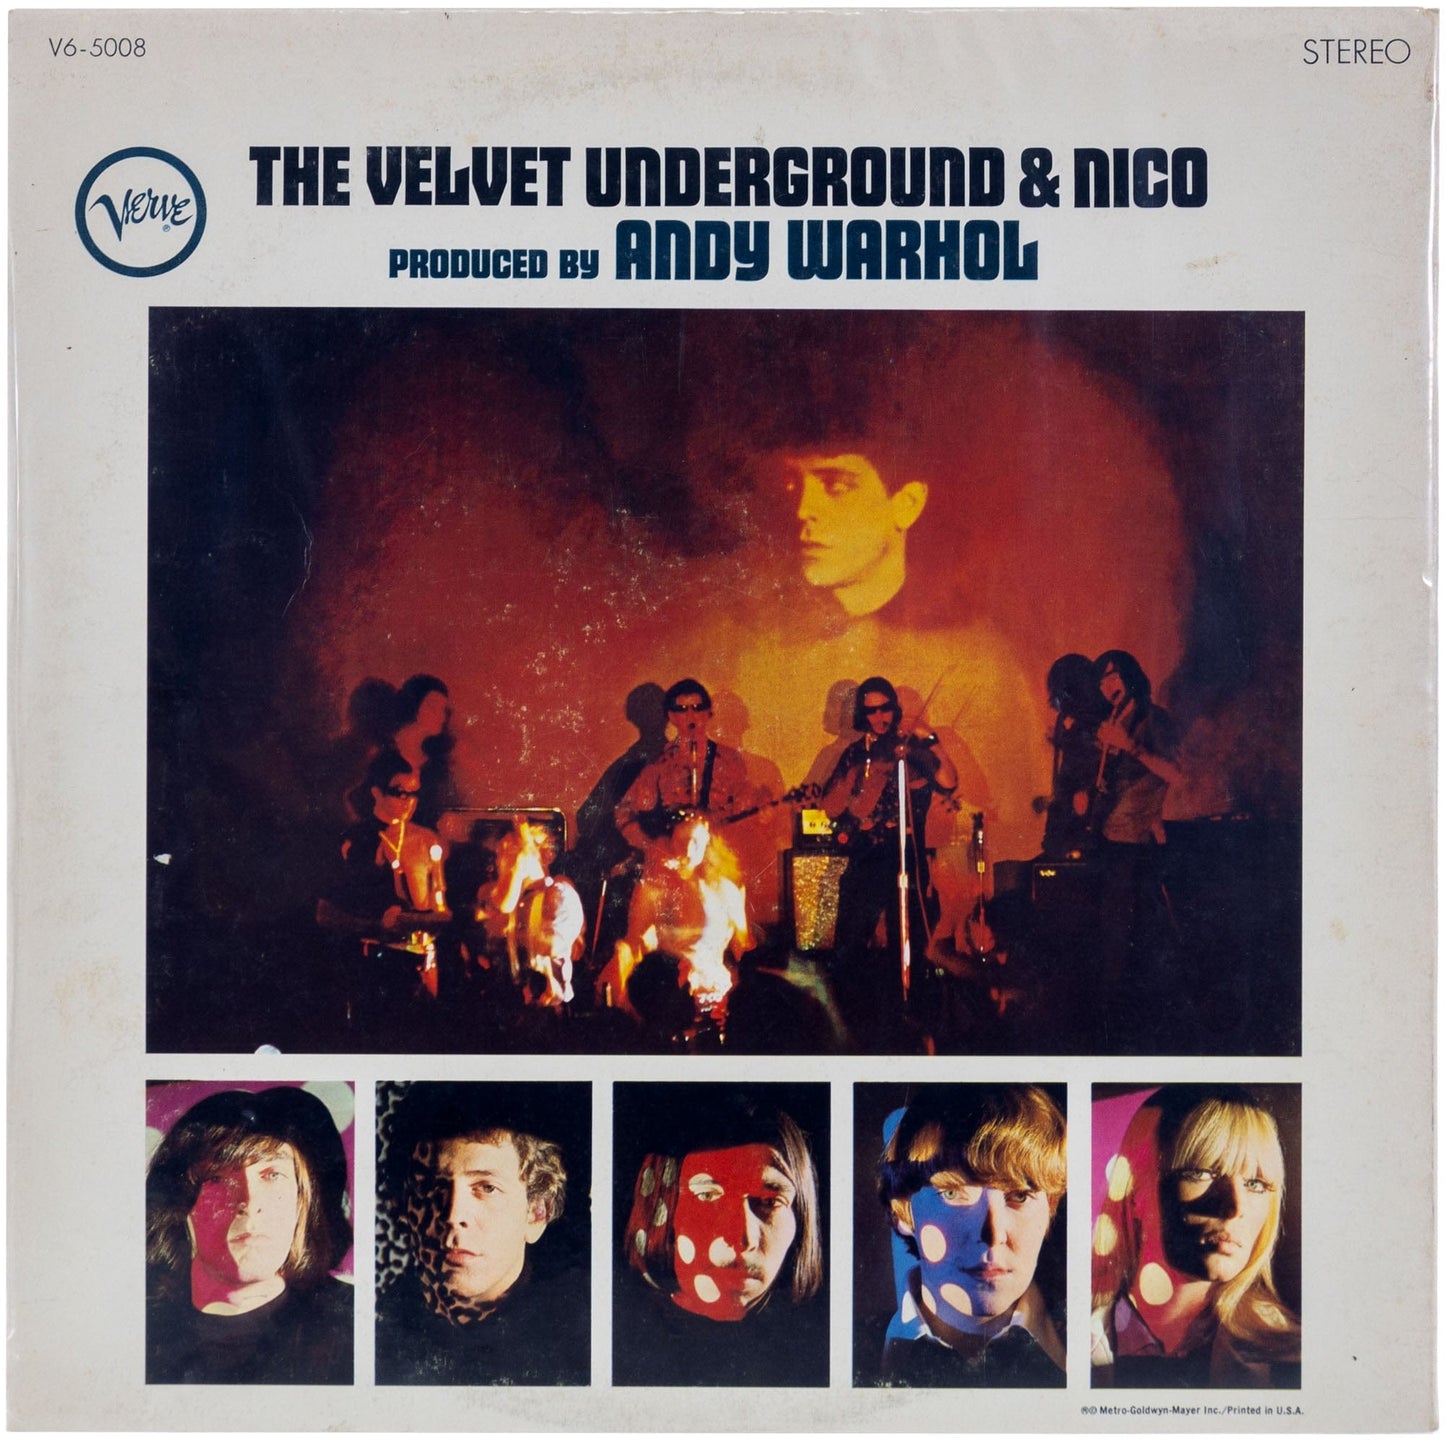 The Velvet Underground & Nico Record Produced By Andy Warhol ZOOM